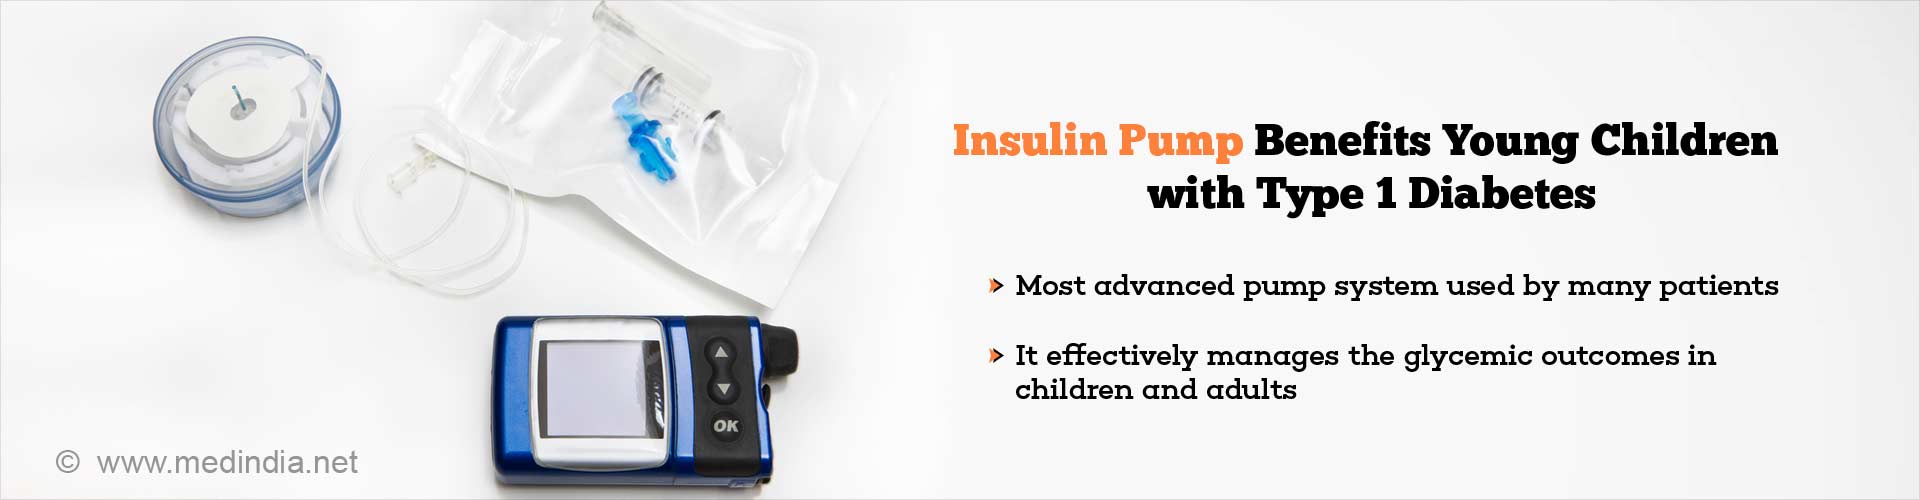 insulin pump benefits young children with type 1 diabetes
- most advanced pump system used by many patients
- it effectively manages the glycemic outcomes in children and adults